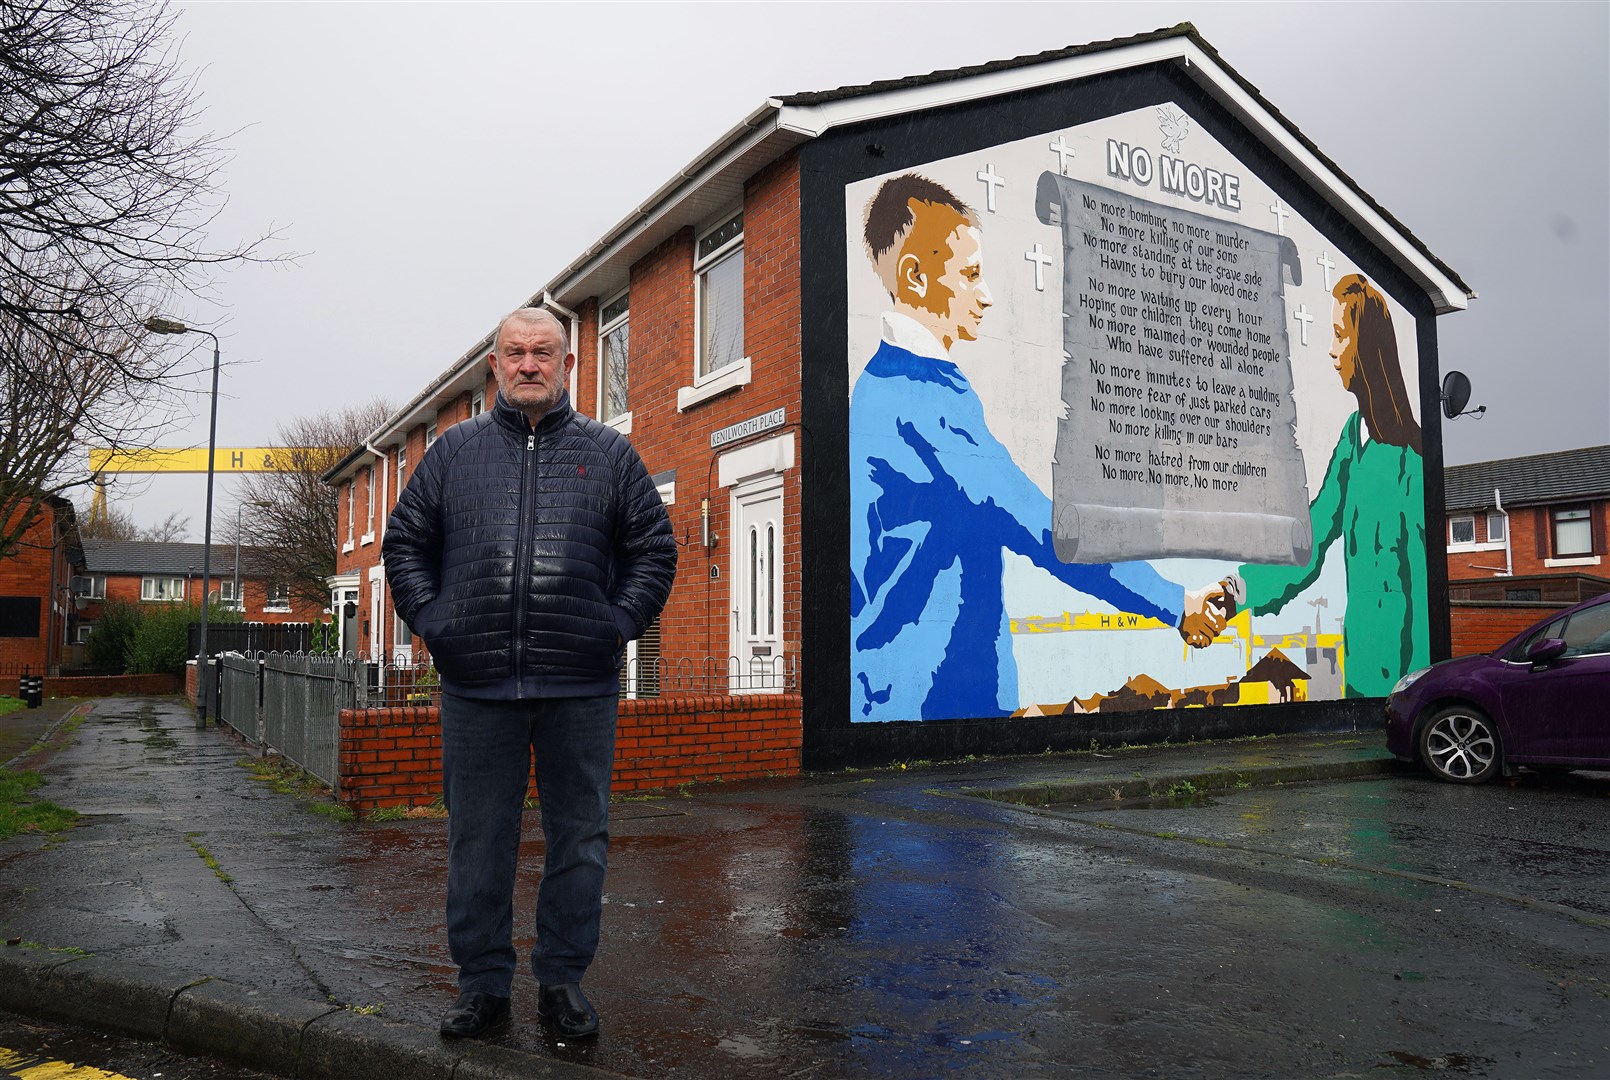 Former loyalist internee Jim Wilson at the ‘No More’ mural close to his home in east Belfast (Brian Lawless/PA)